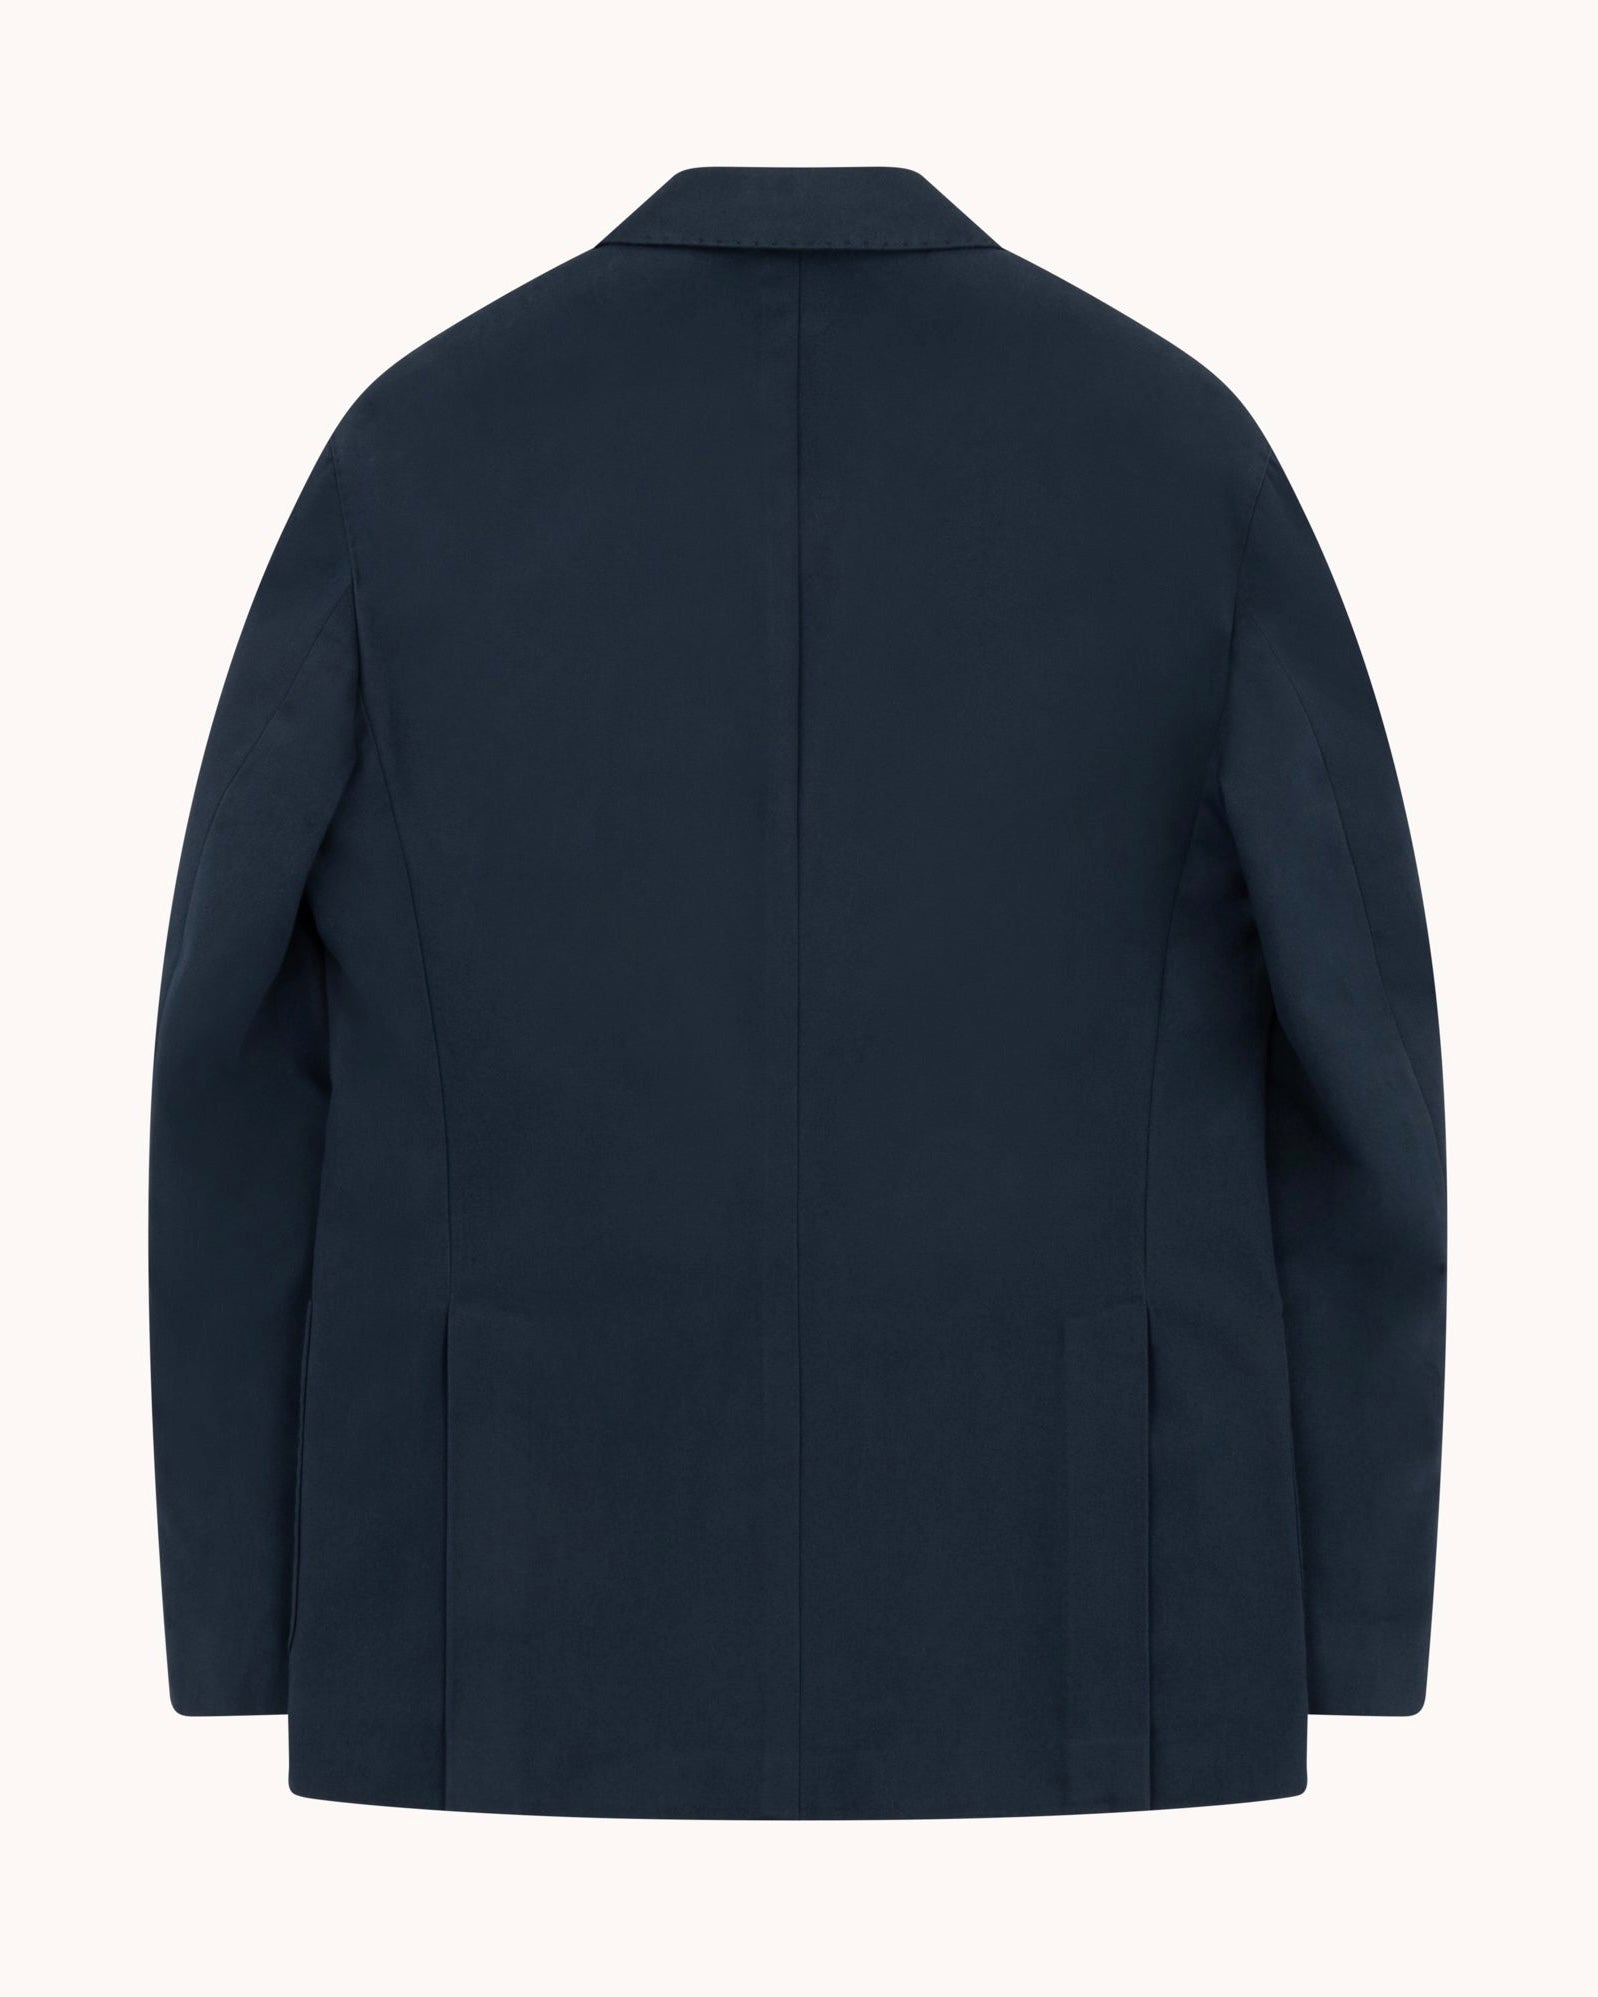 Double Breasted Sport Jacket - Navy Brushed Cotton